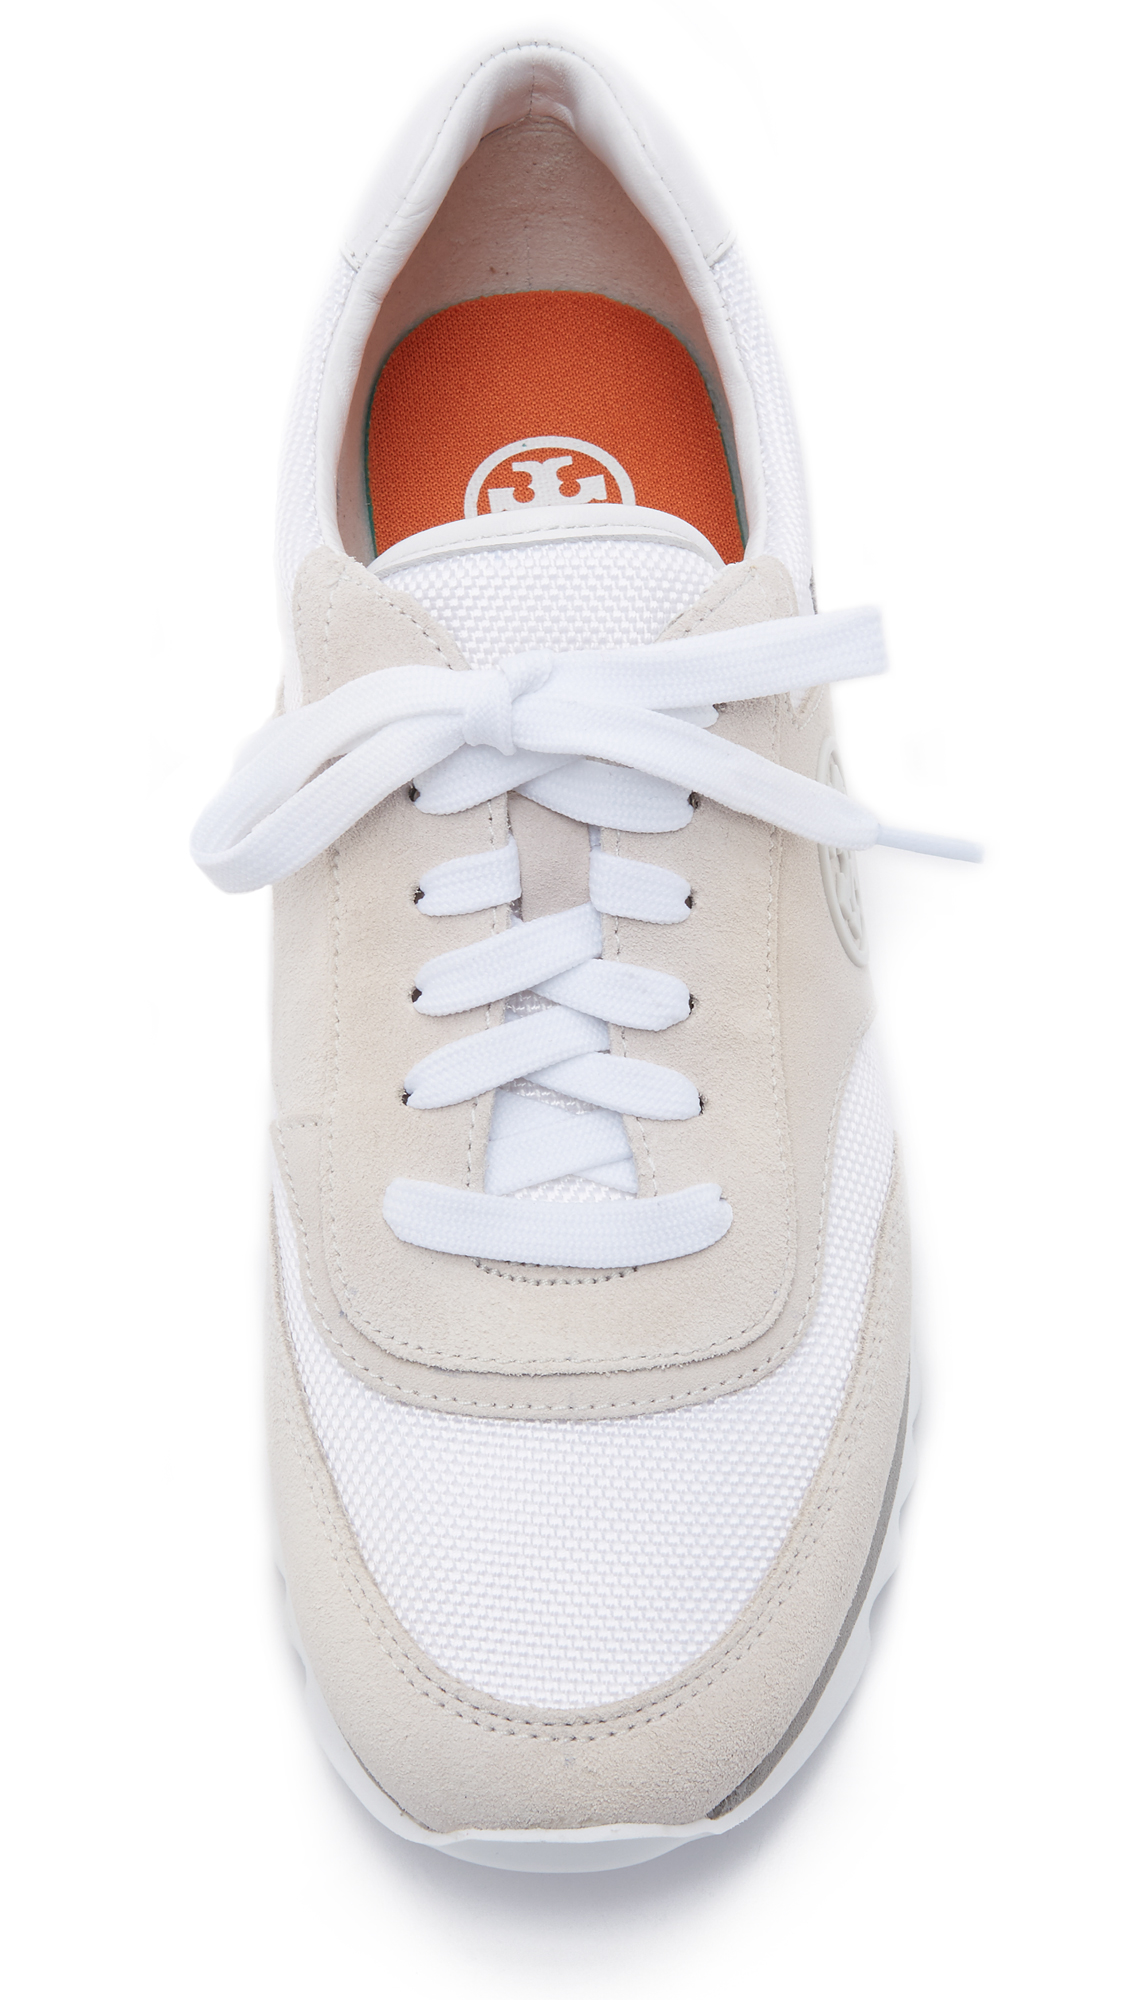 Tory Burch Sawtooth Logo Trainer Sneakers in White | Lyst